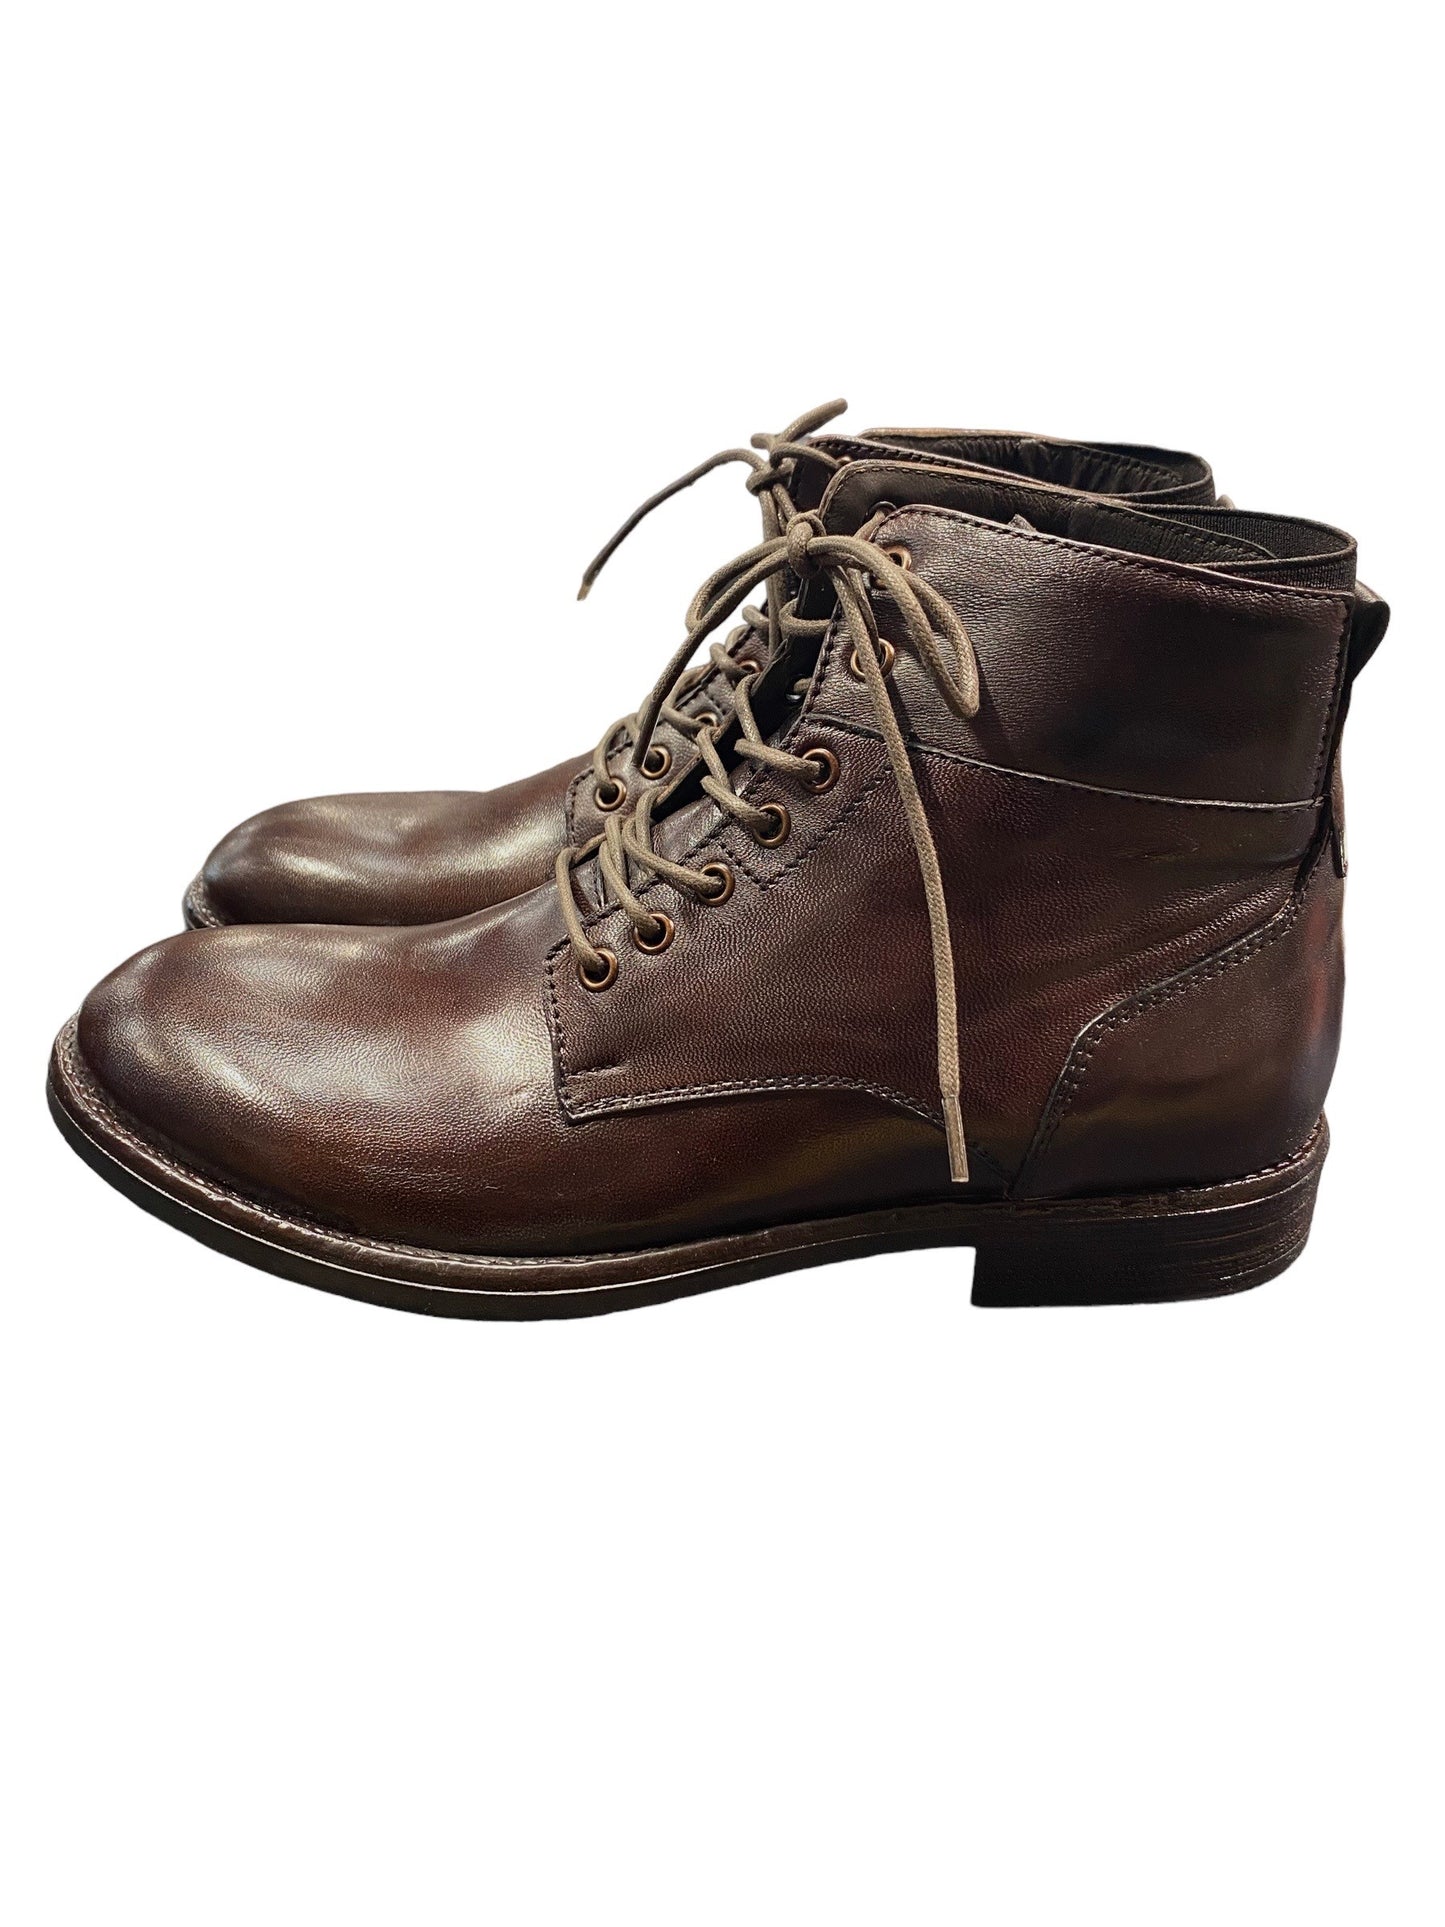 Emporio Italia - Coraf Leather Lace Up Boots - Black or Brown